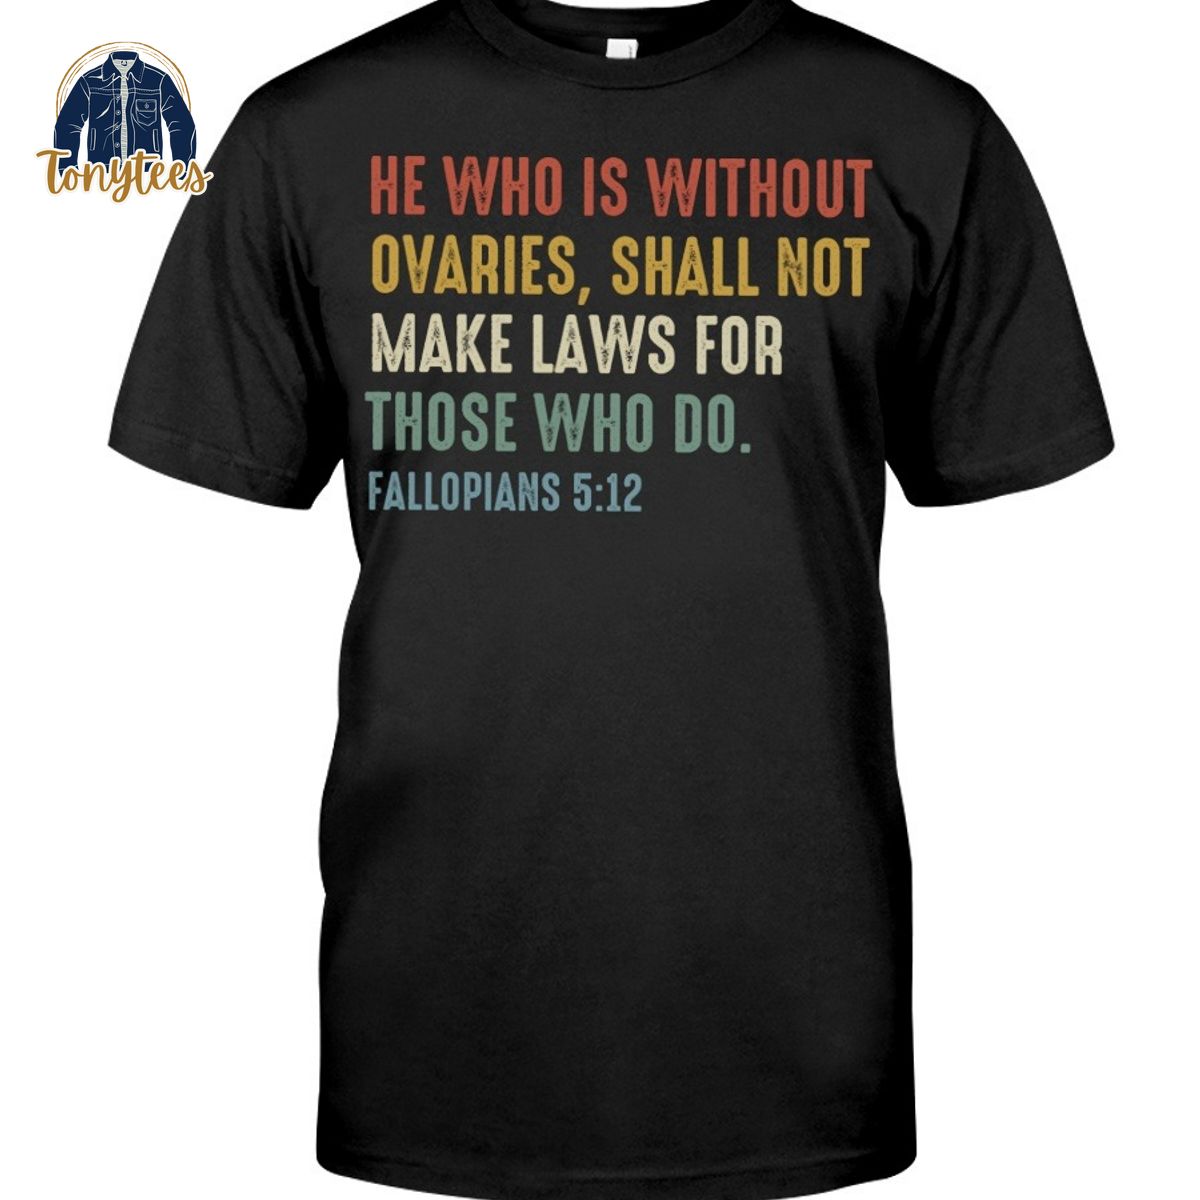 He who is without ovaries shall not law for those who do shirt